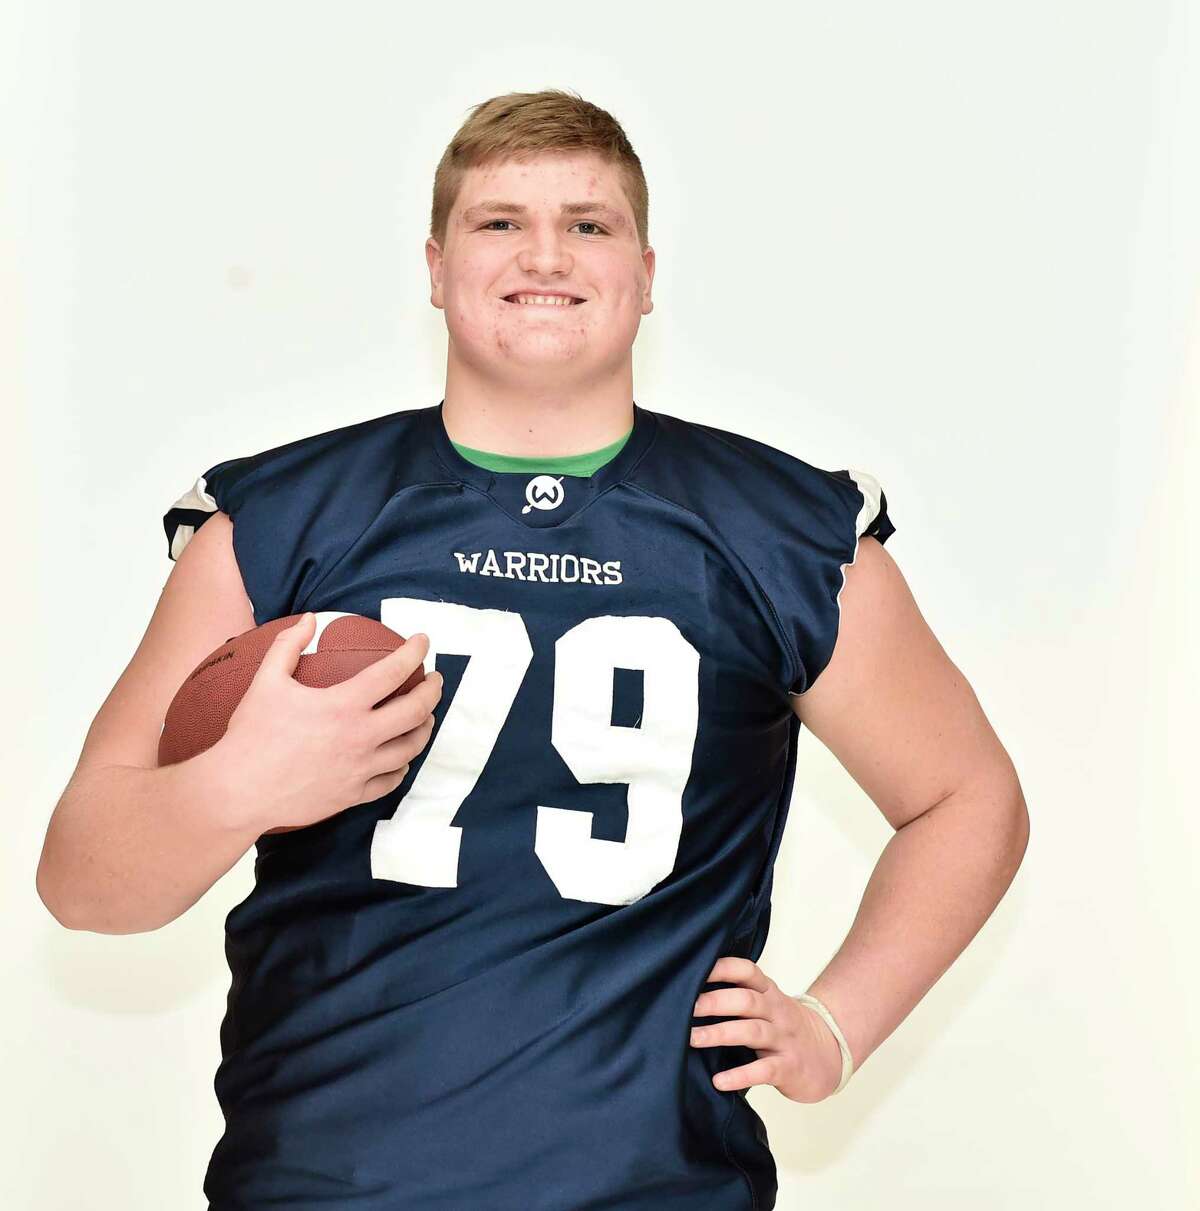 Wilton junior Matt Gulbin has already received offers from 12 Division I college football programs.